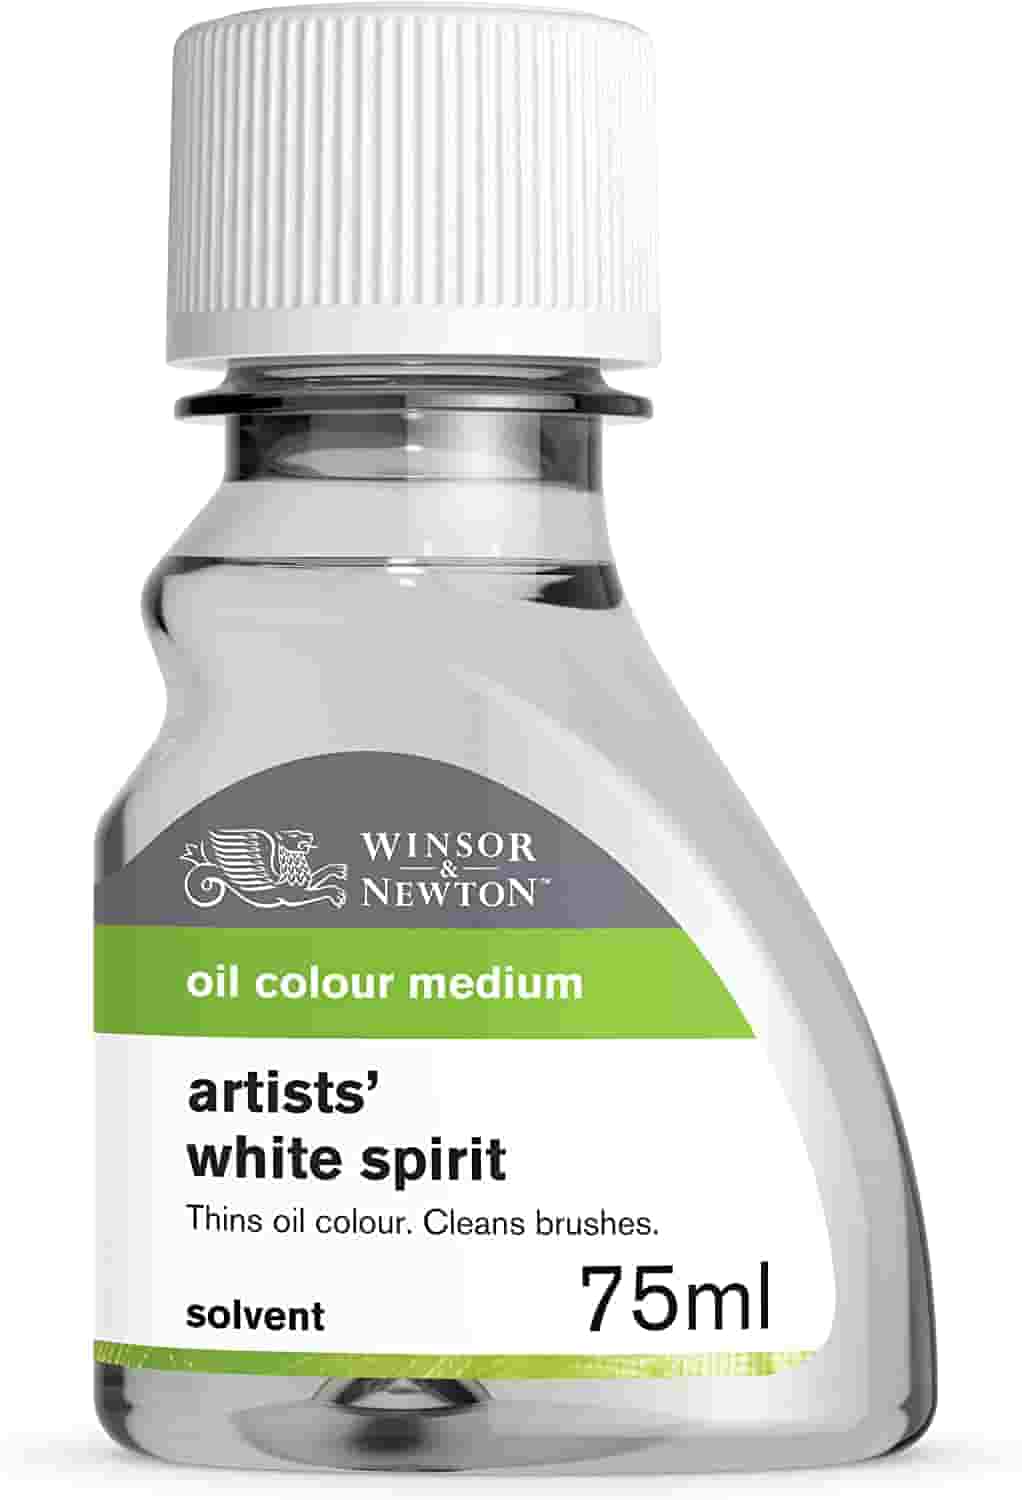 How to remove yellowed varnish from oil painting - Winsor & Newton Artistic white spirit to remove yellowed varnish